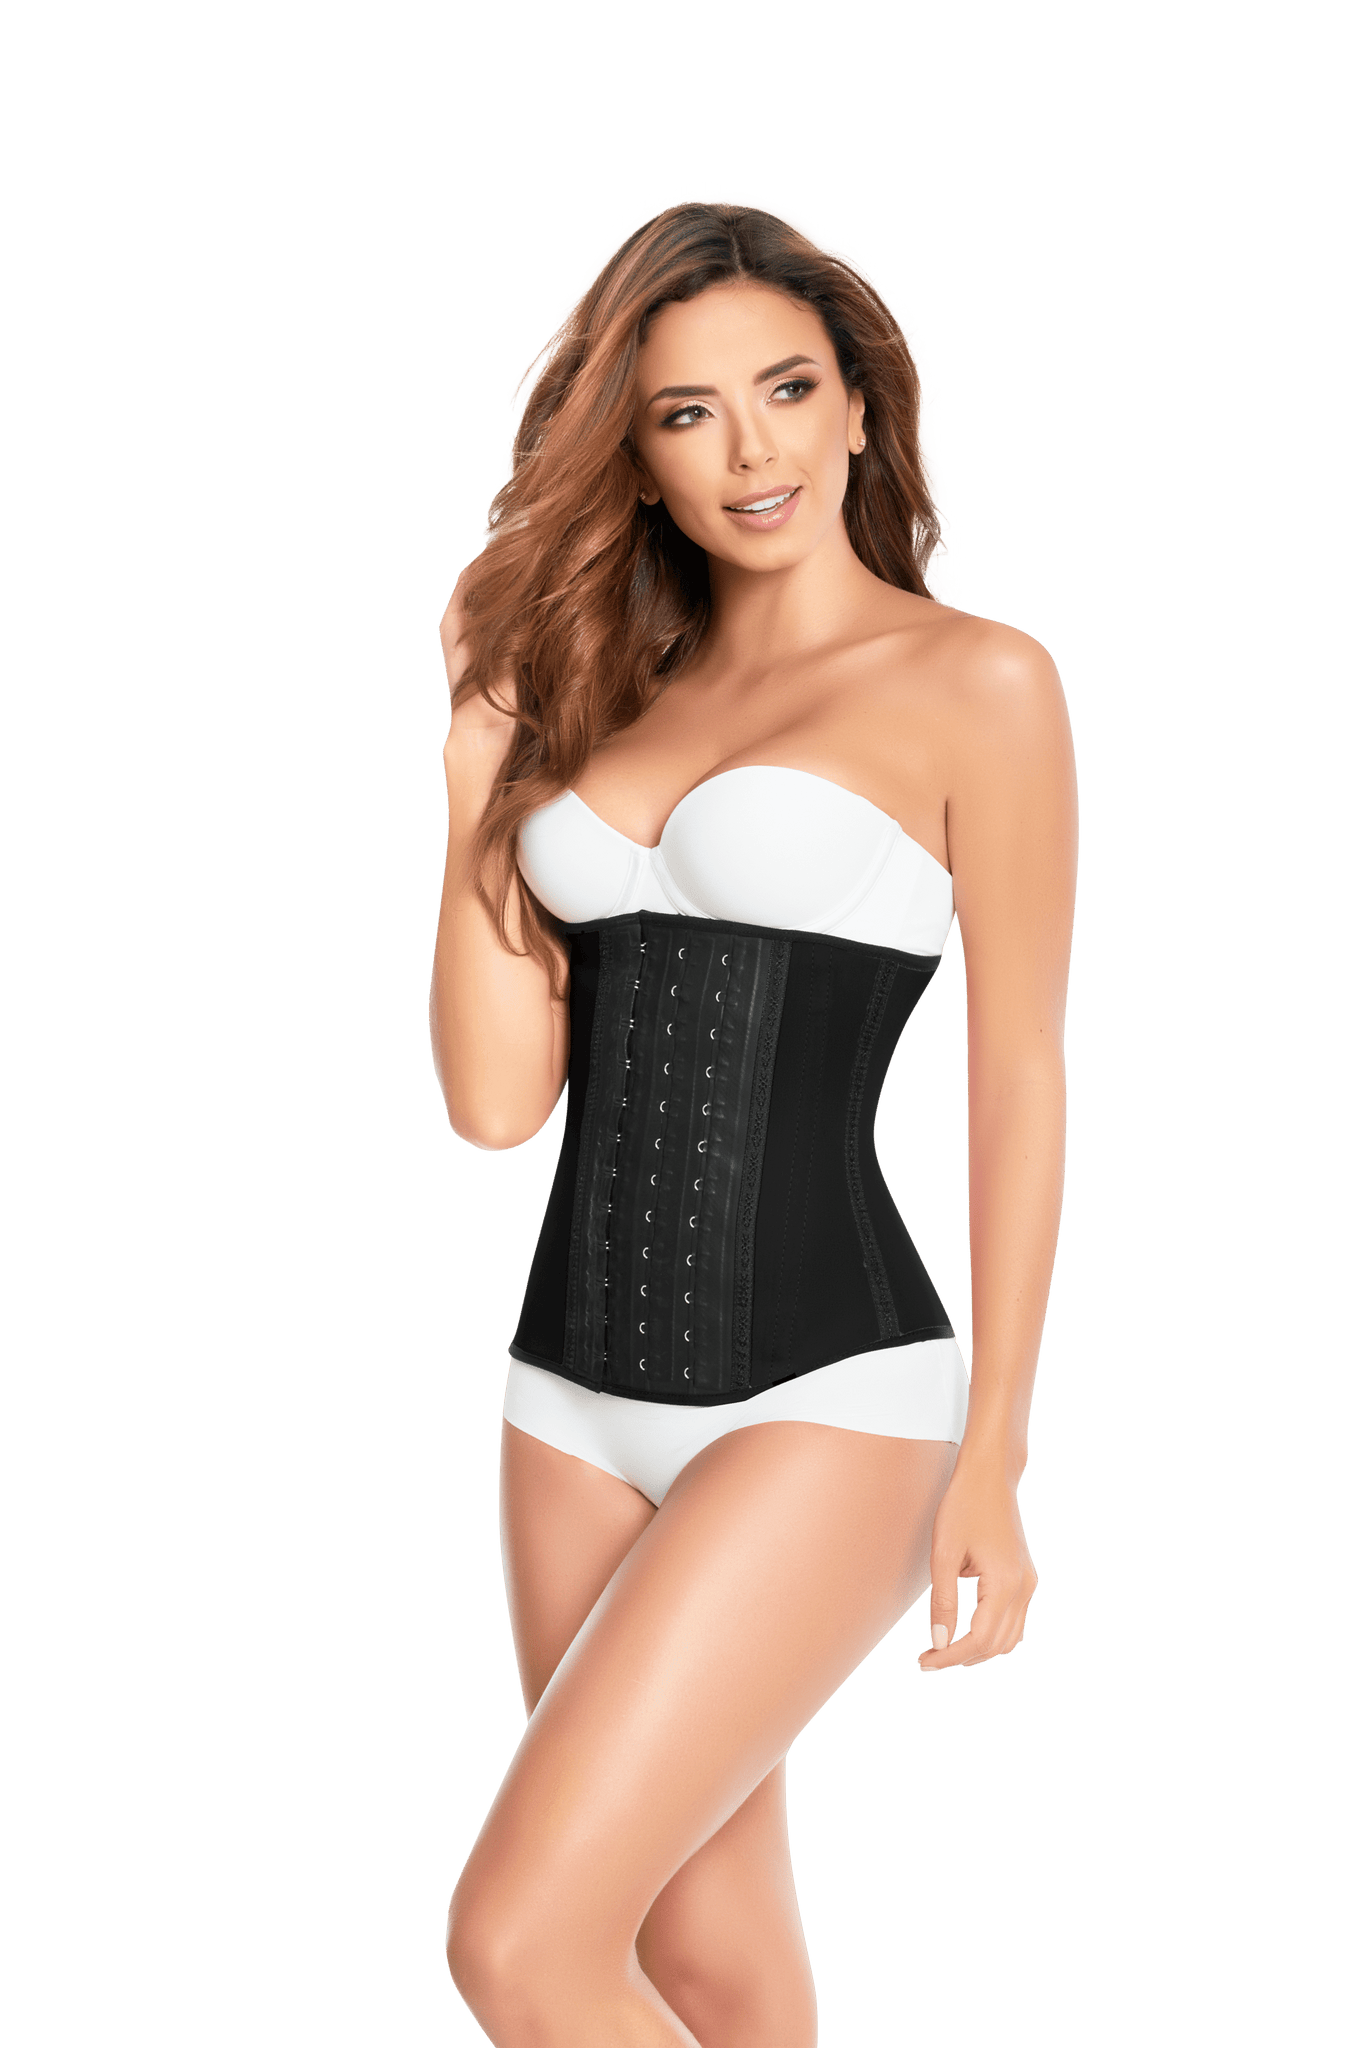 rubber girdle products for sale